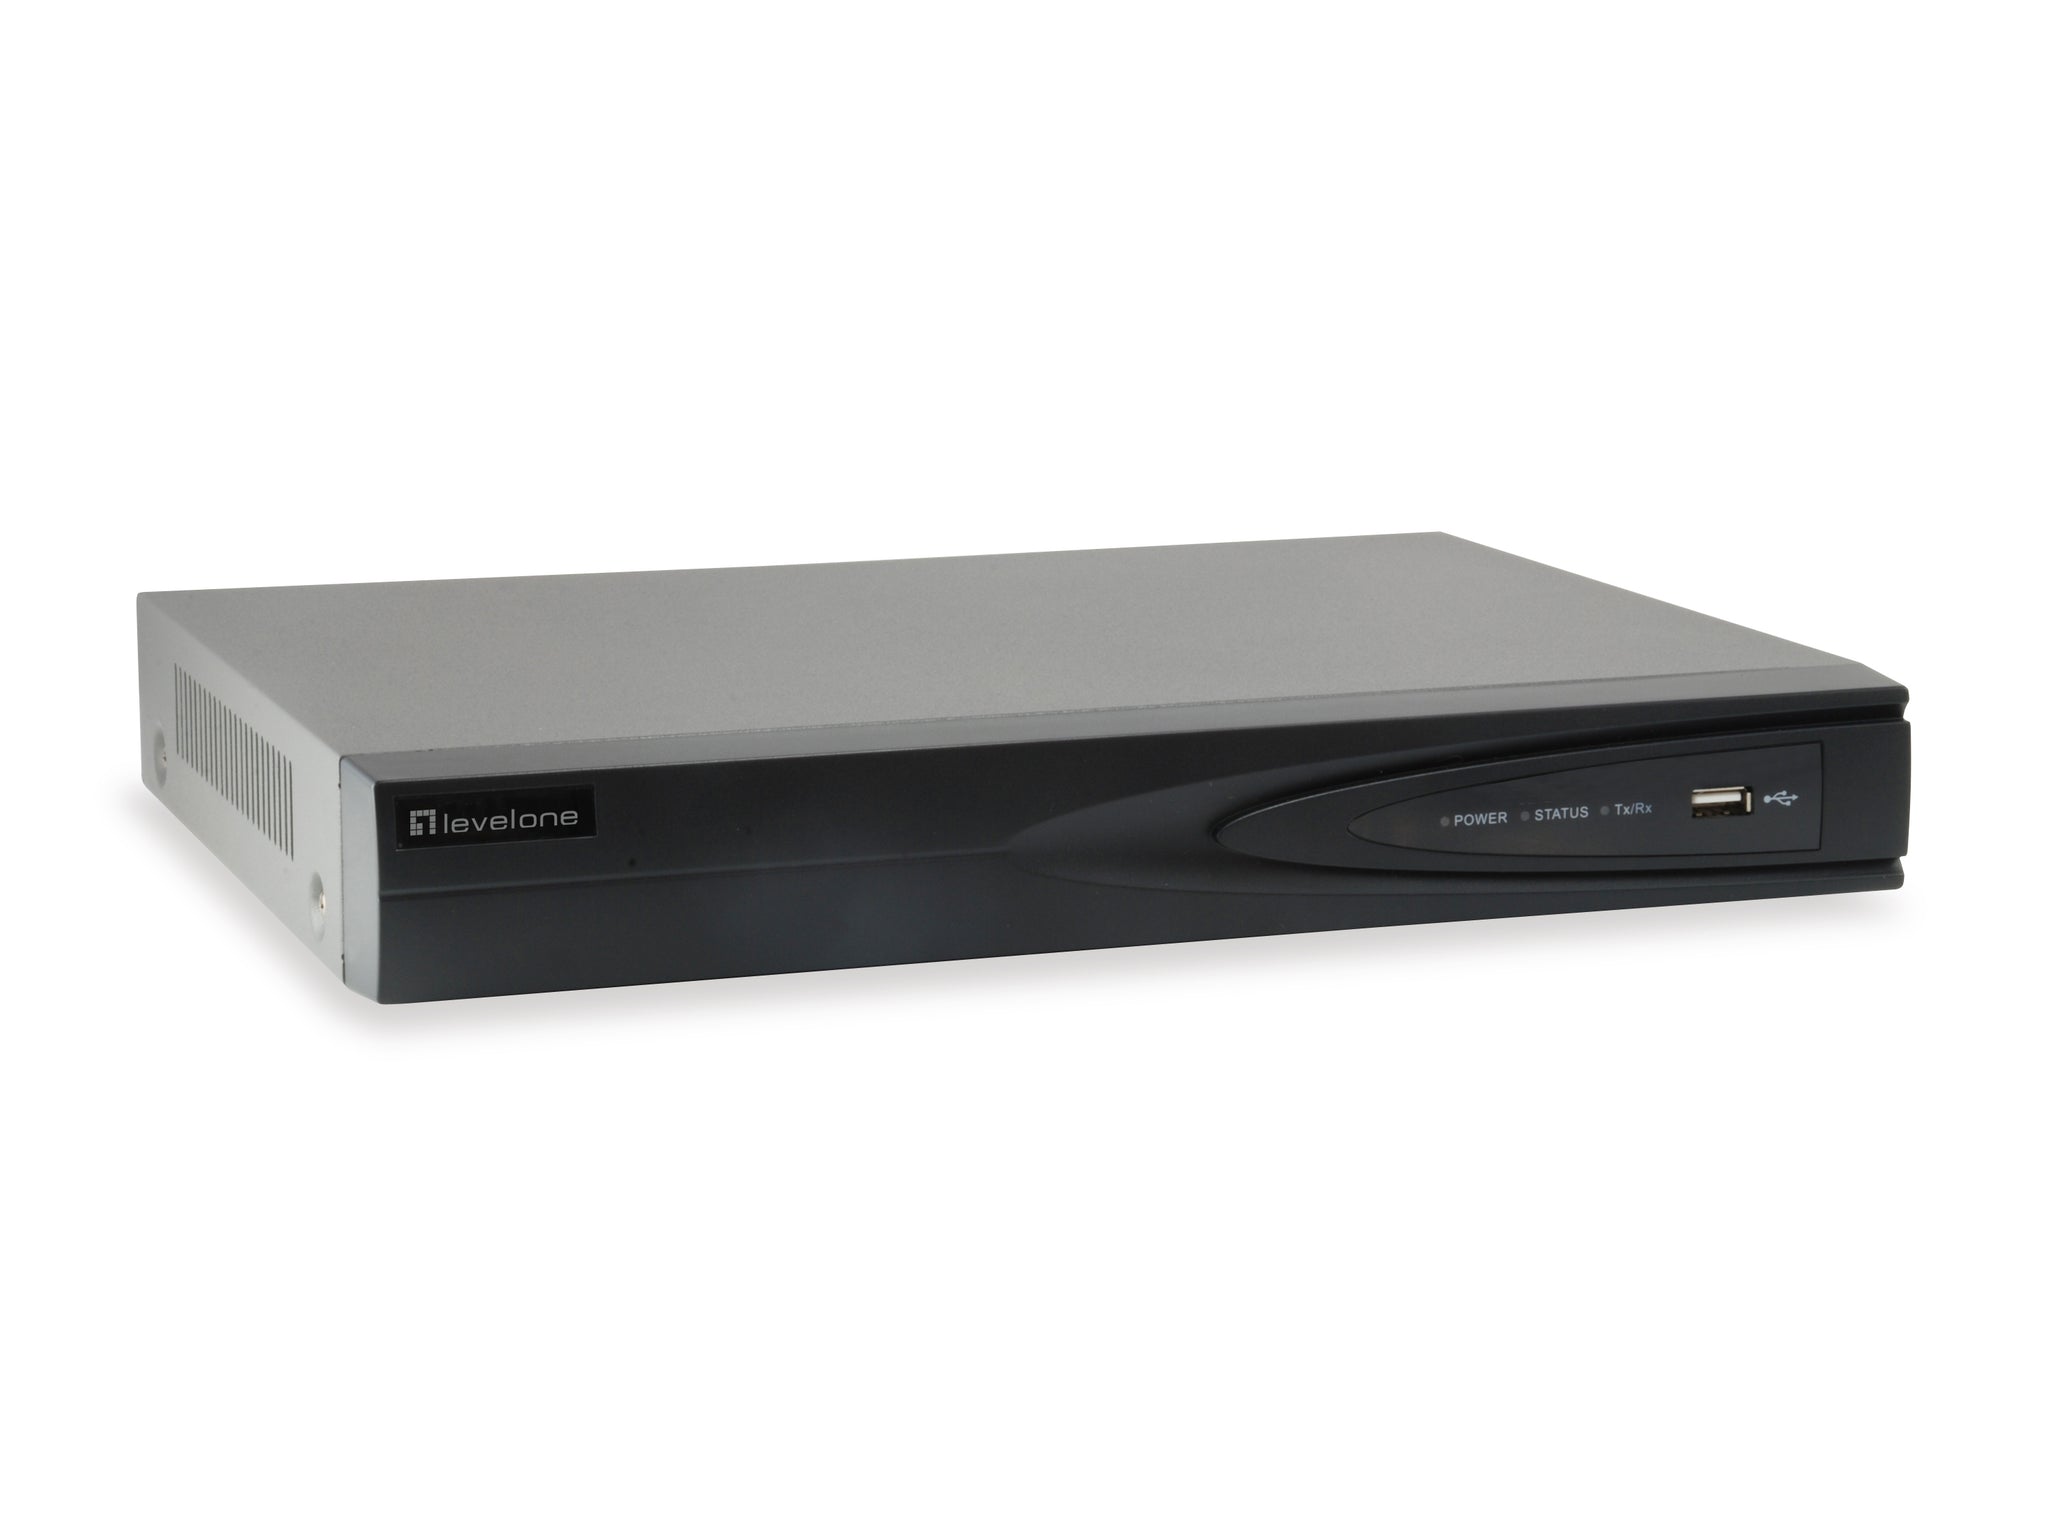 NVR-0504 4-Channel PoE Network Video Recorder